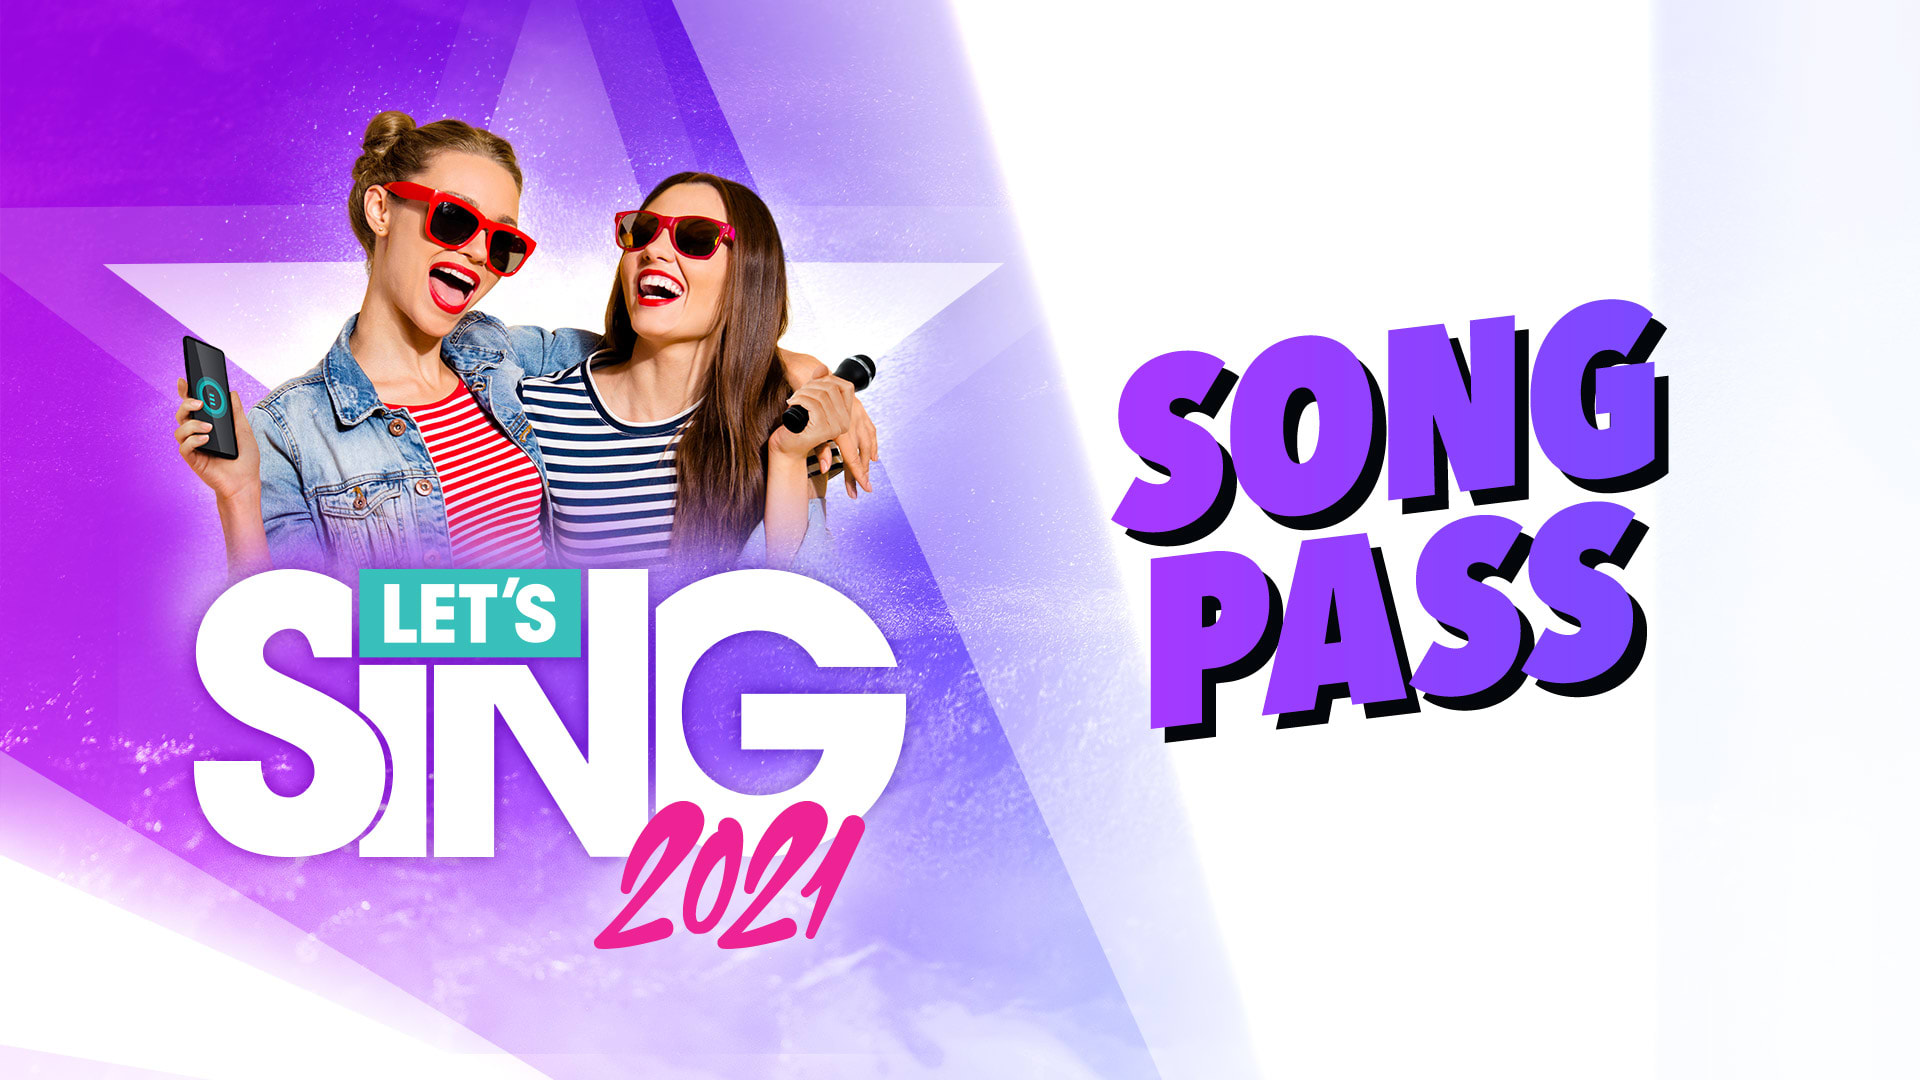 Let's Sing 2021 - Song Pass